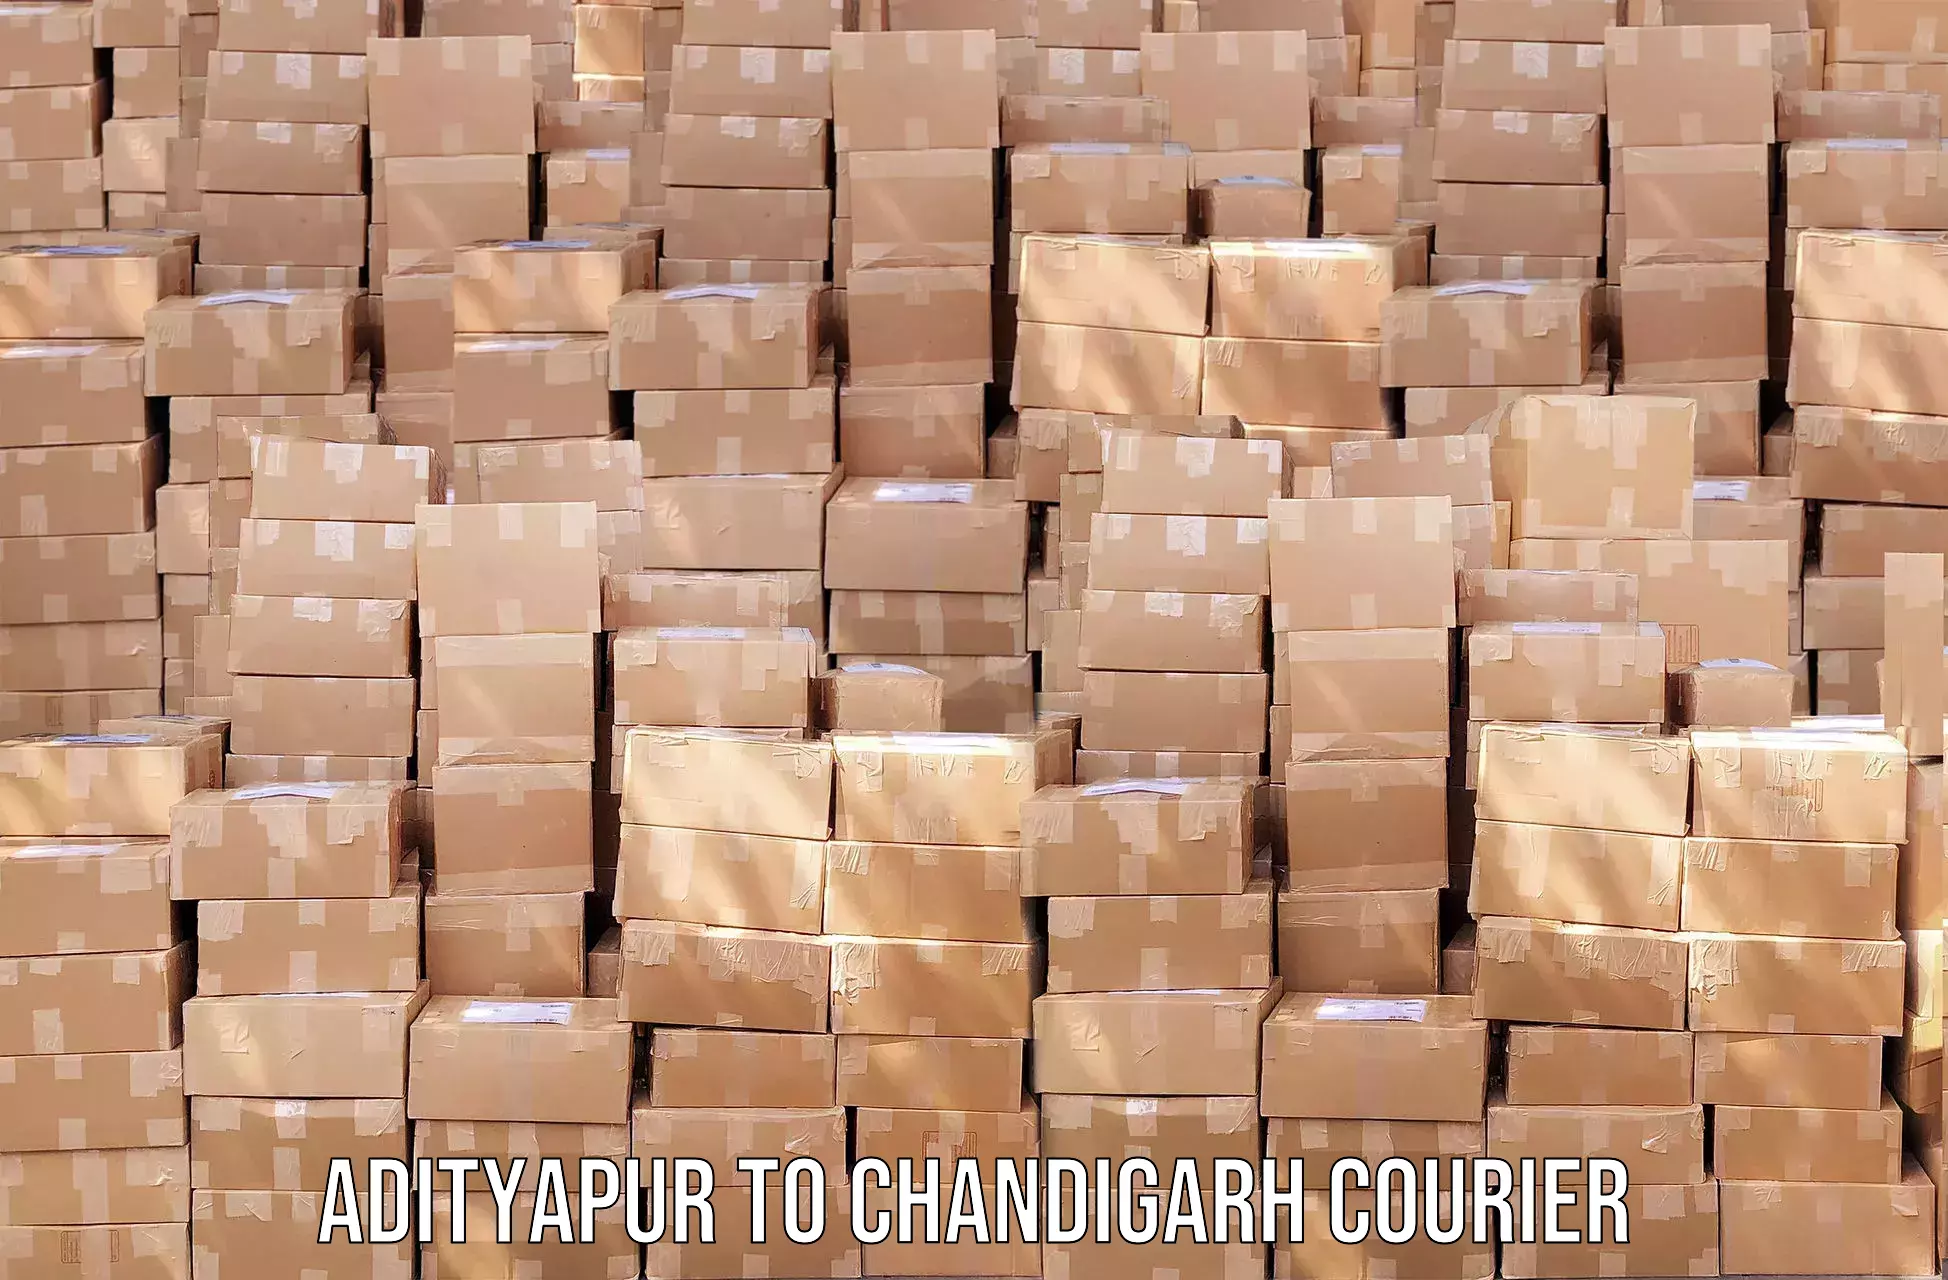 Global courier networks Adityapur to Chandigarh